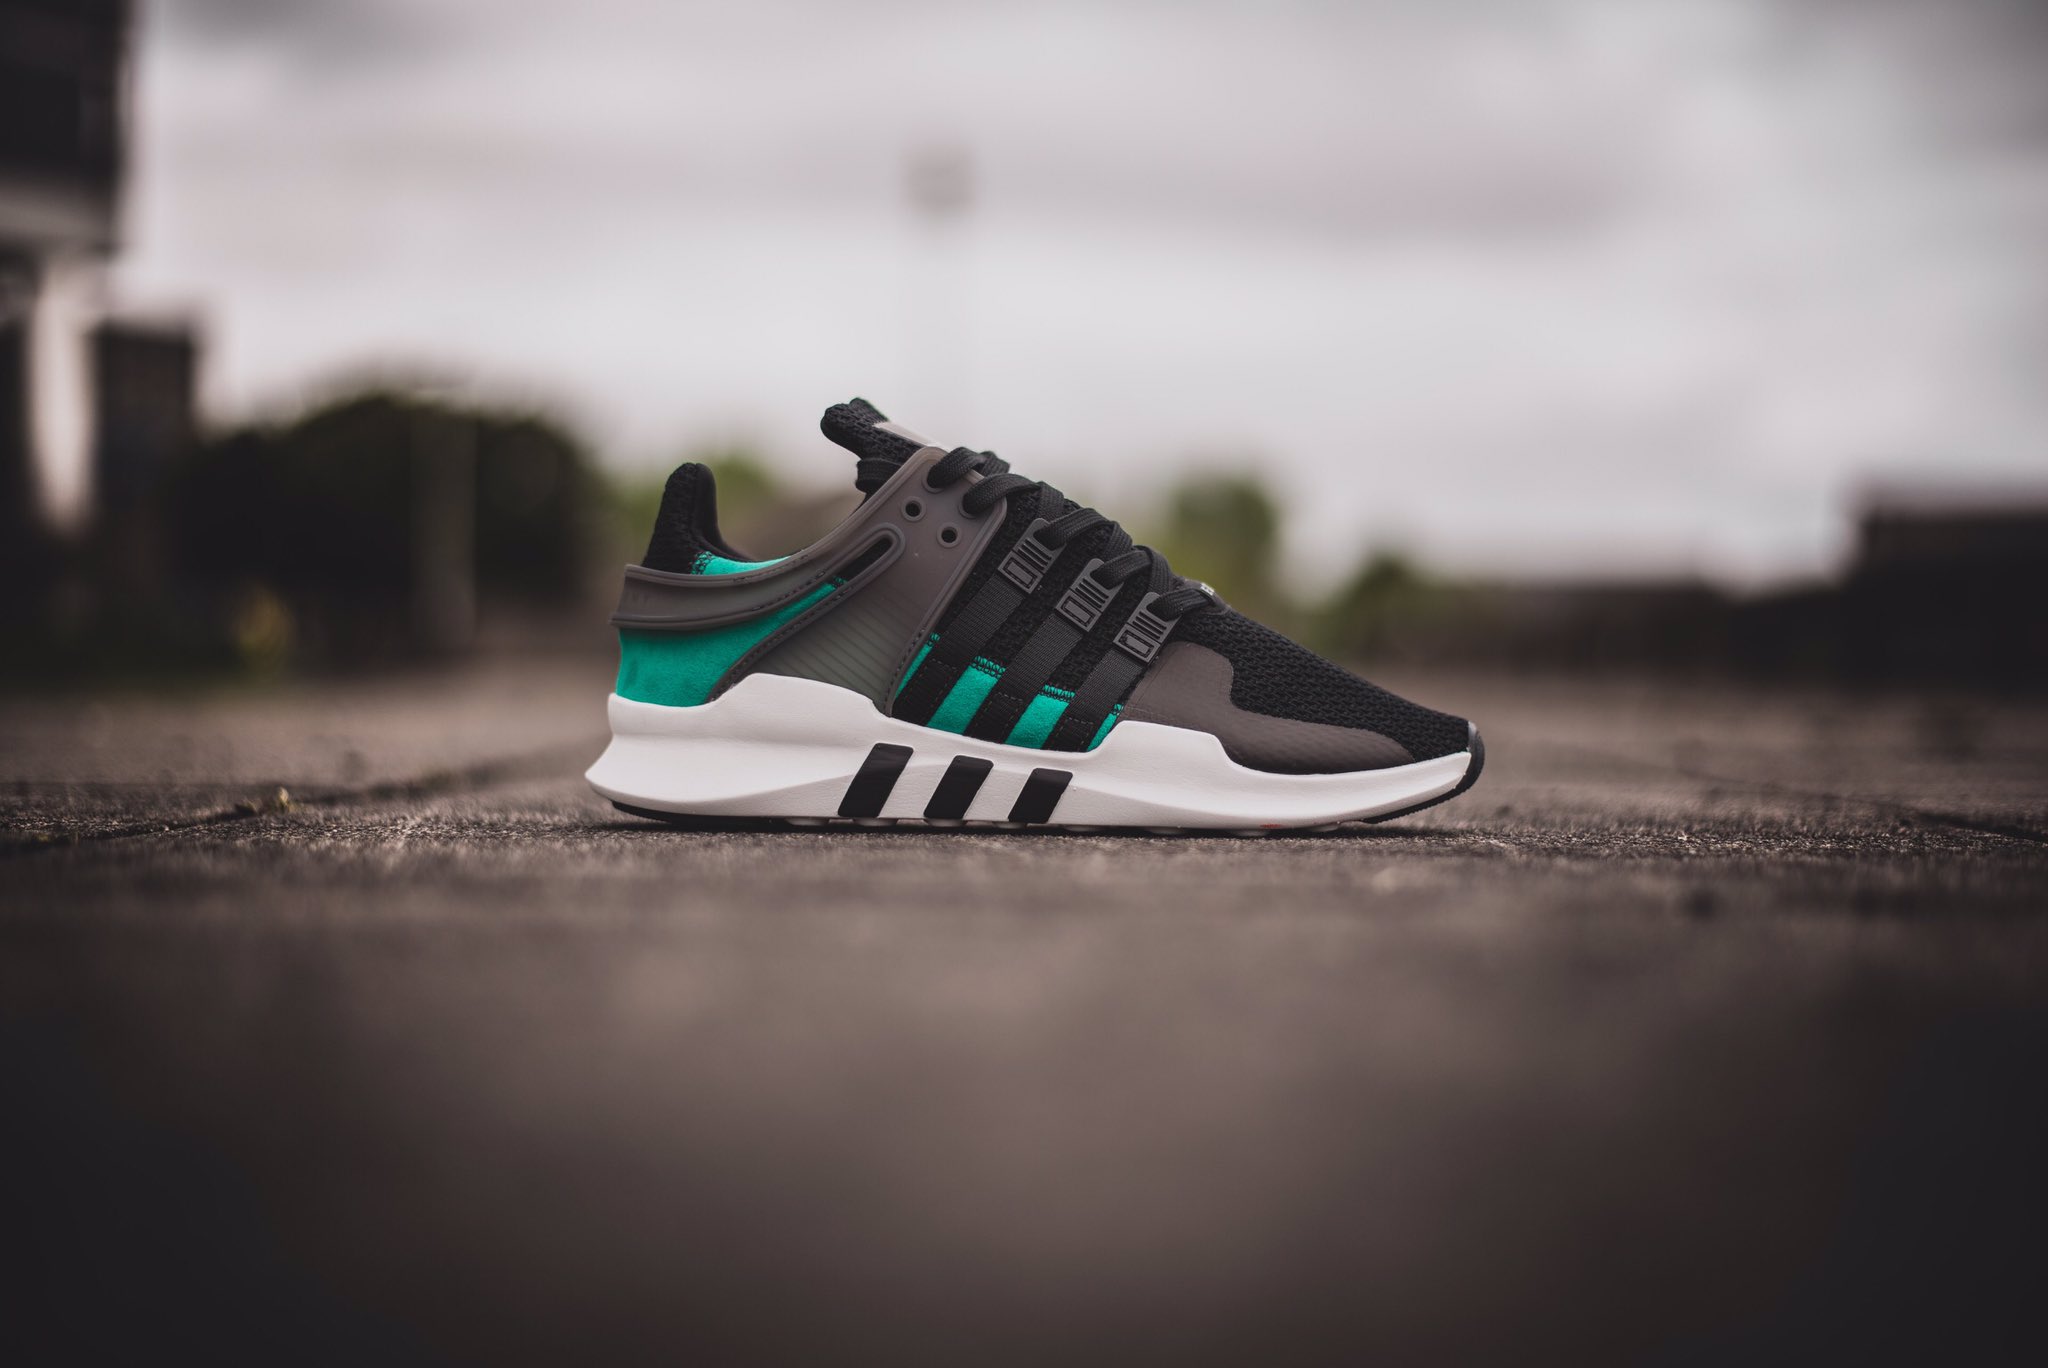 HANON on Twitter: "adidas EQT Support ADV 91-16 is available to buy ONLINE  now! #hanon #adidas https://t.co/JbTx82iMhD https://t.co/7wbMhDyl1p" /  Twitter